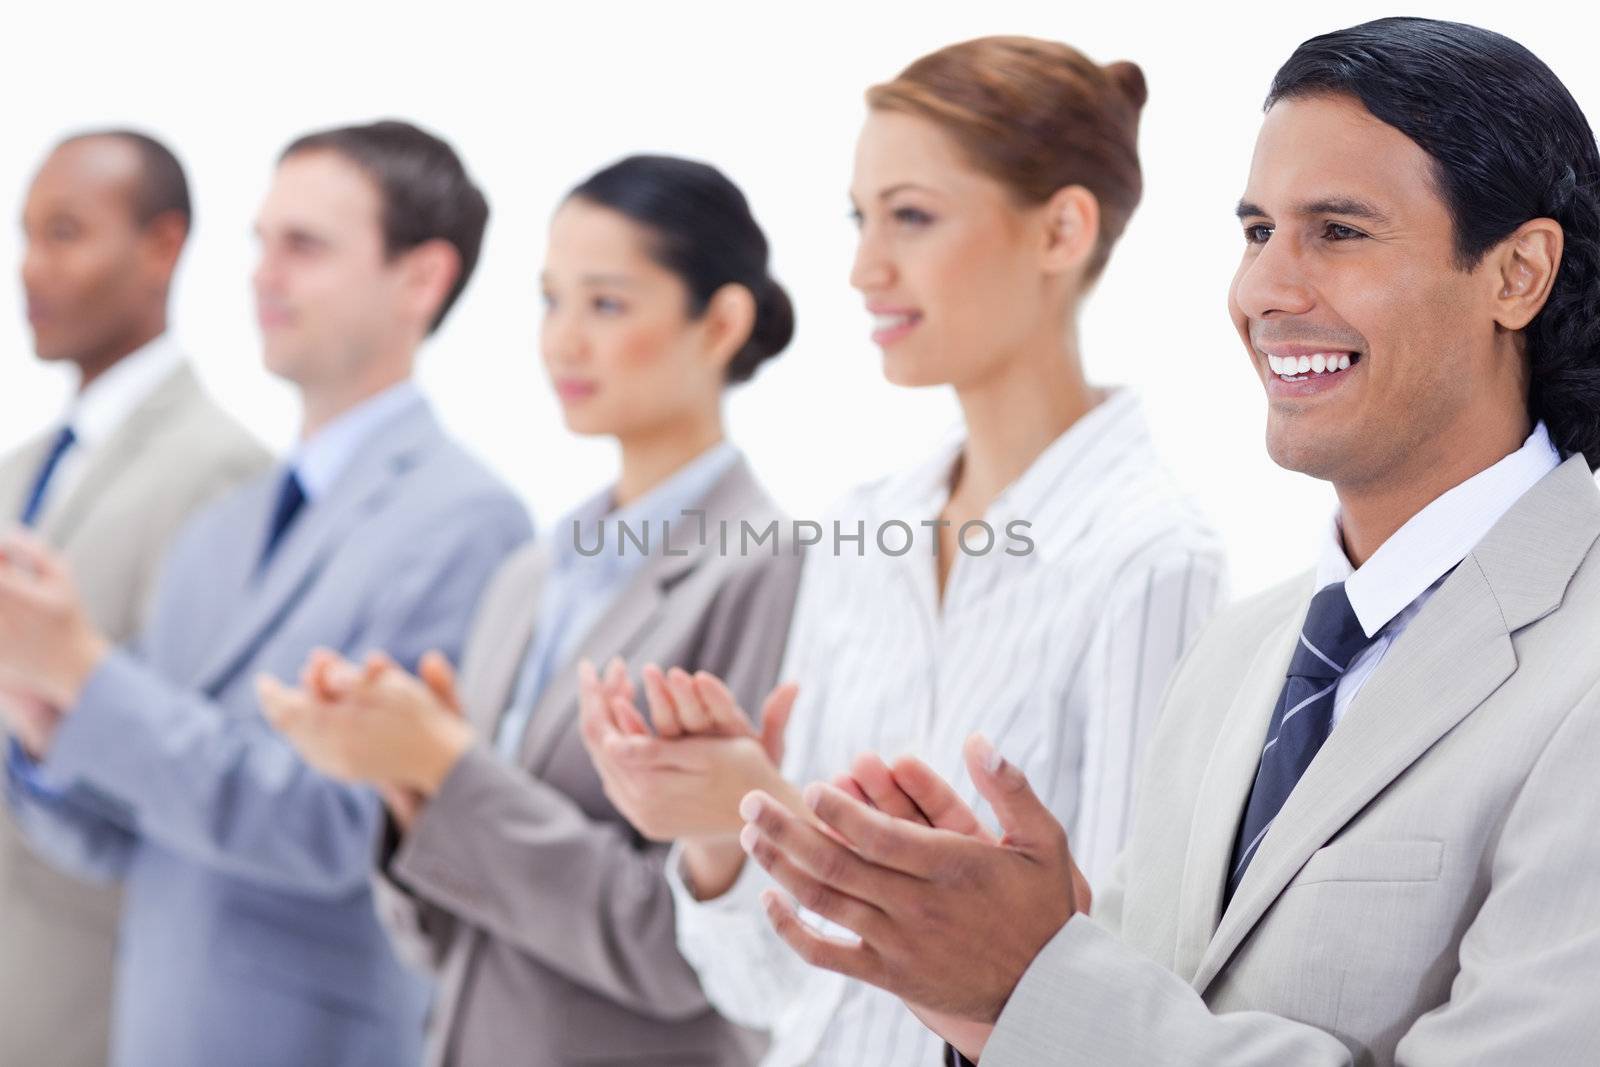 Business team applauding while looking towards the left side with focus on the first man against white background